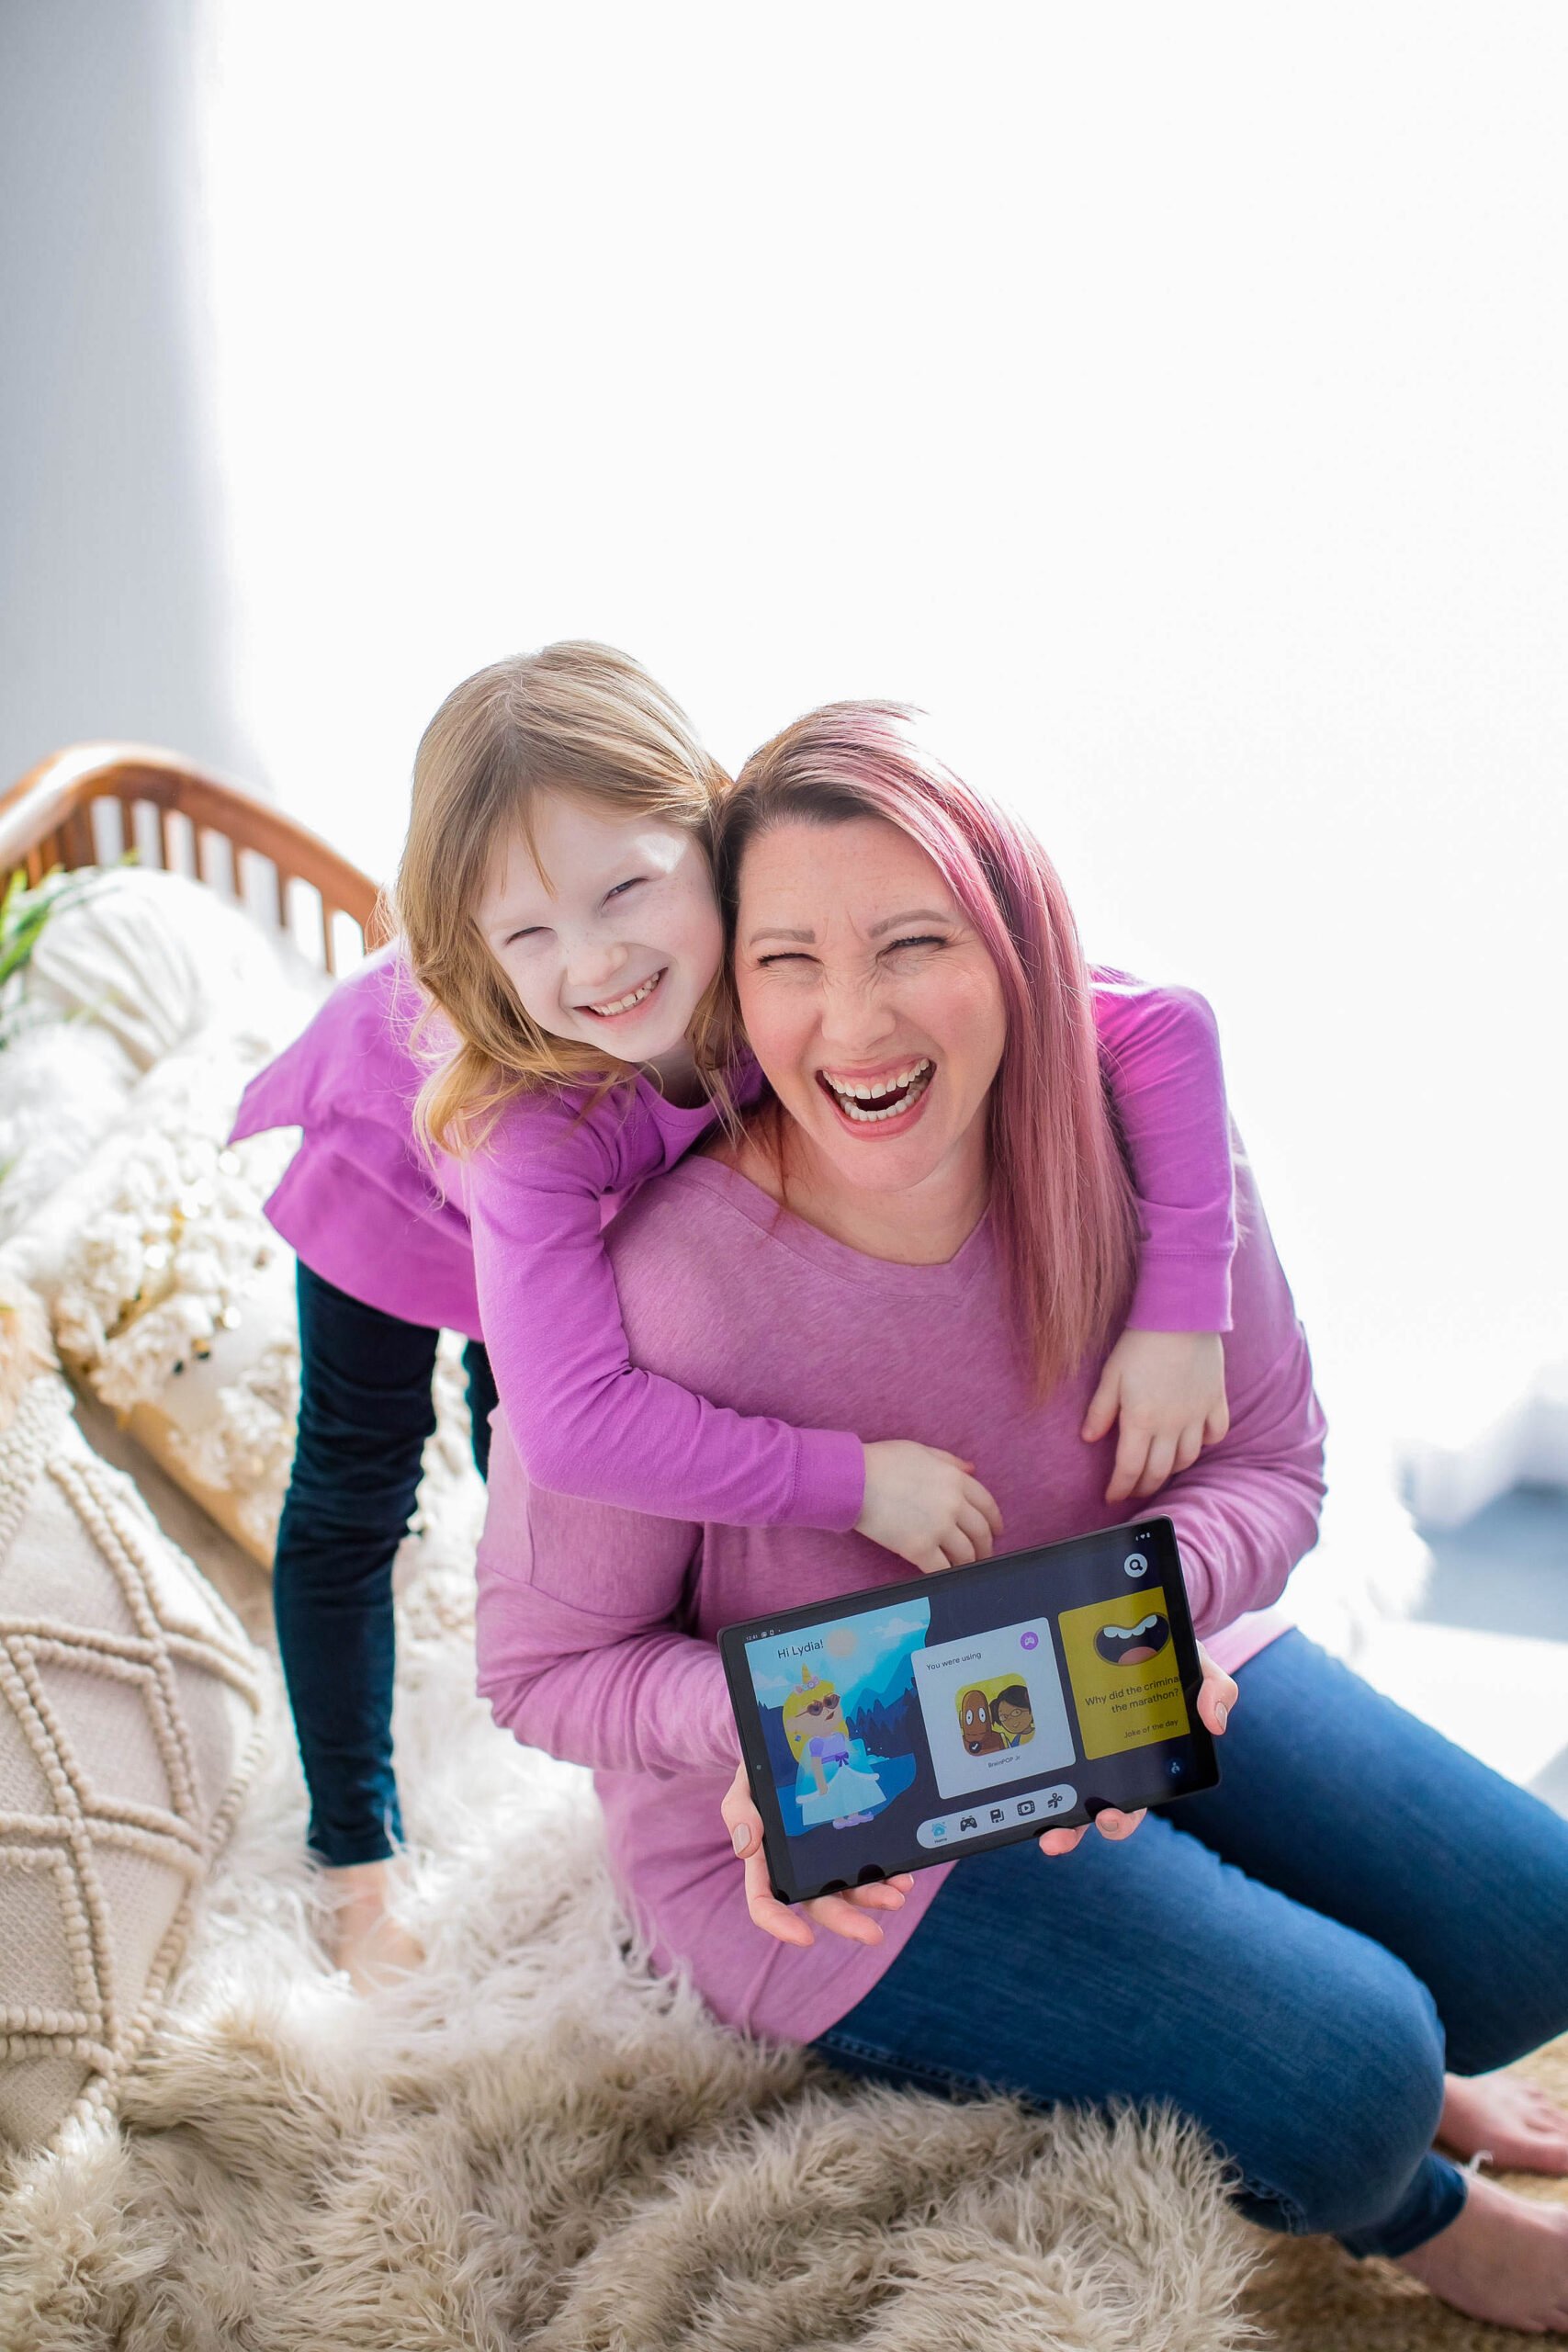 Digging into ways to keep your kids entertained and learning? These are tips for helping kids find great content (specifically for elementary school aged children) from a teacher, behavior specialist and mom!